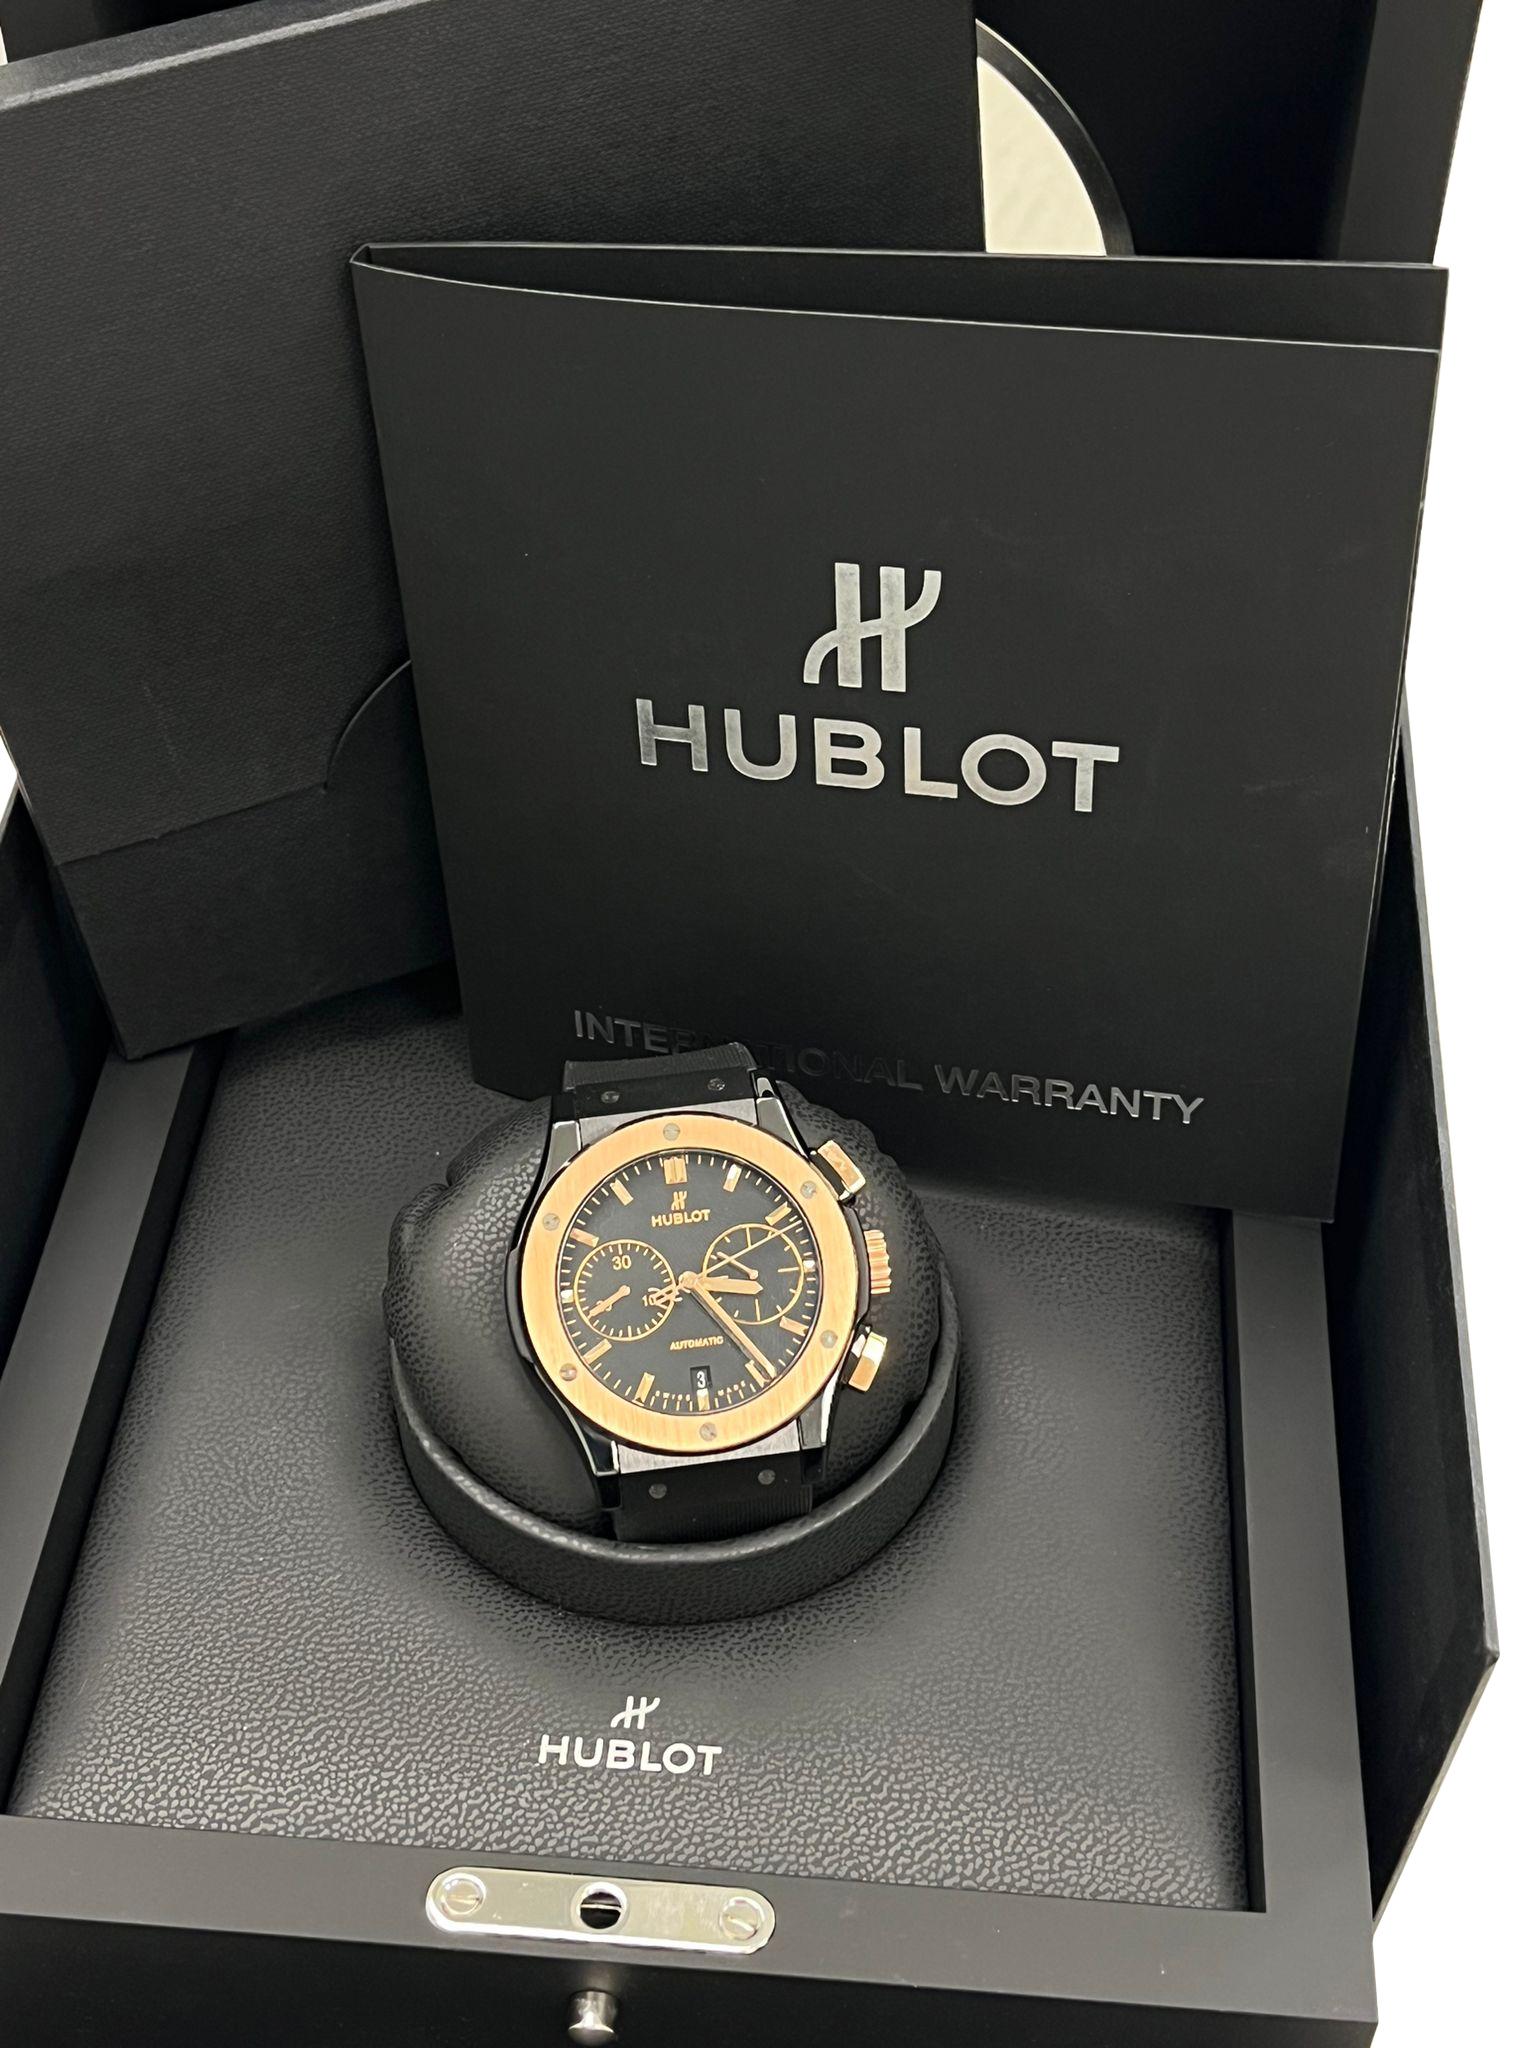 Hublot Classic Fusion Chronograph Ceramic King Gold 45mm Watch 521.CO.1181.RX In Excellent Condition For Sale In Aventura, FL